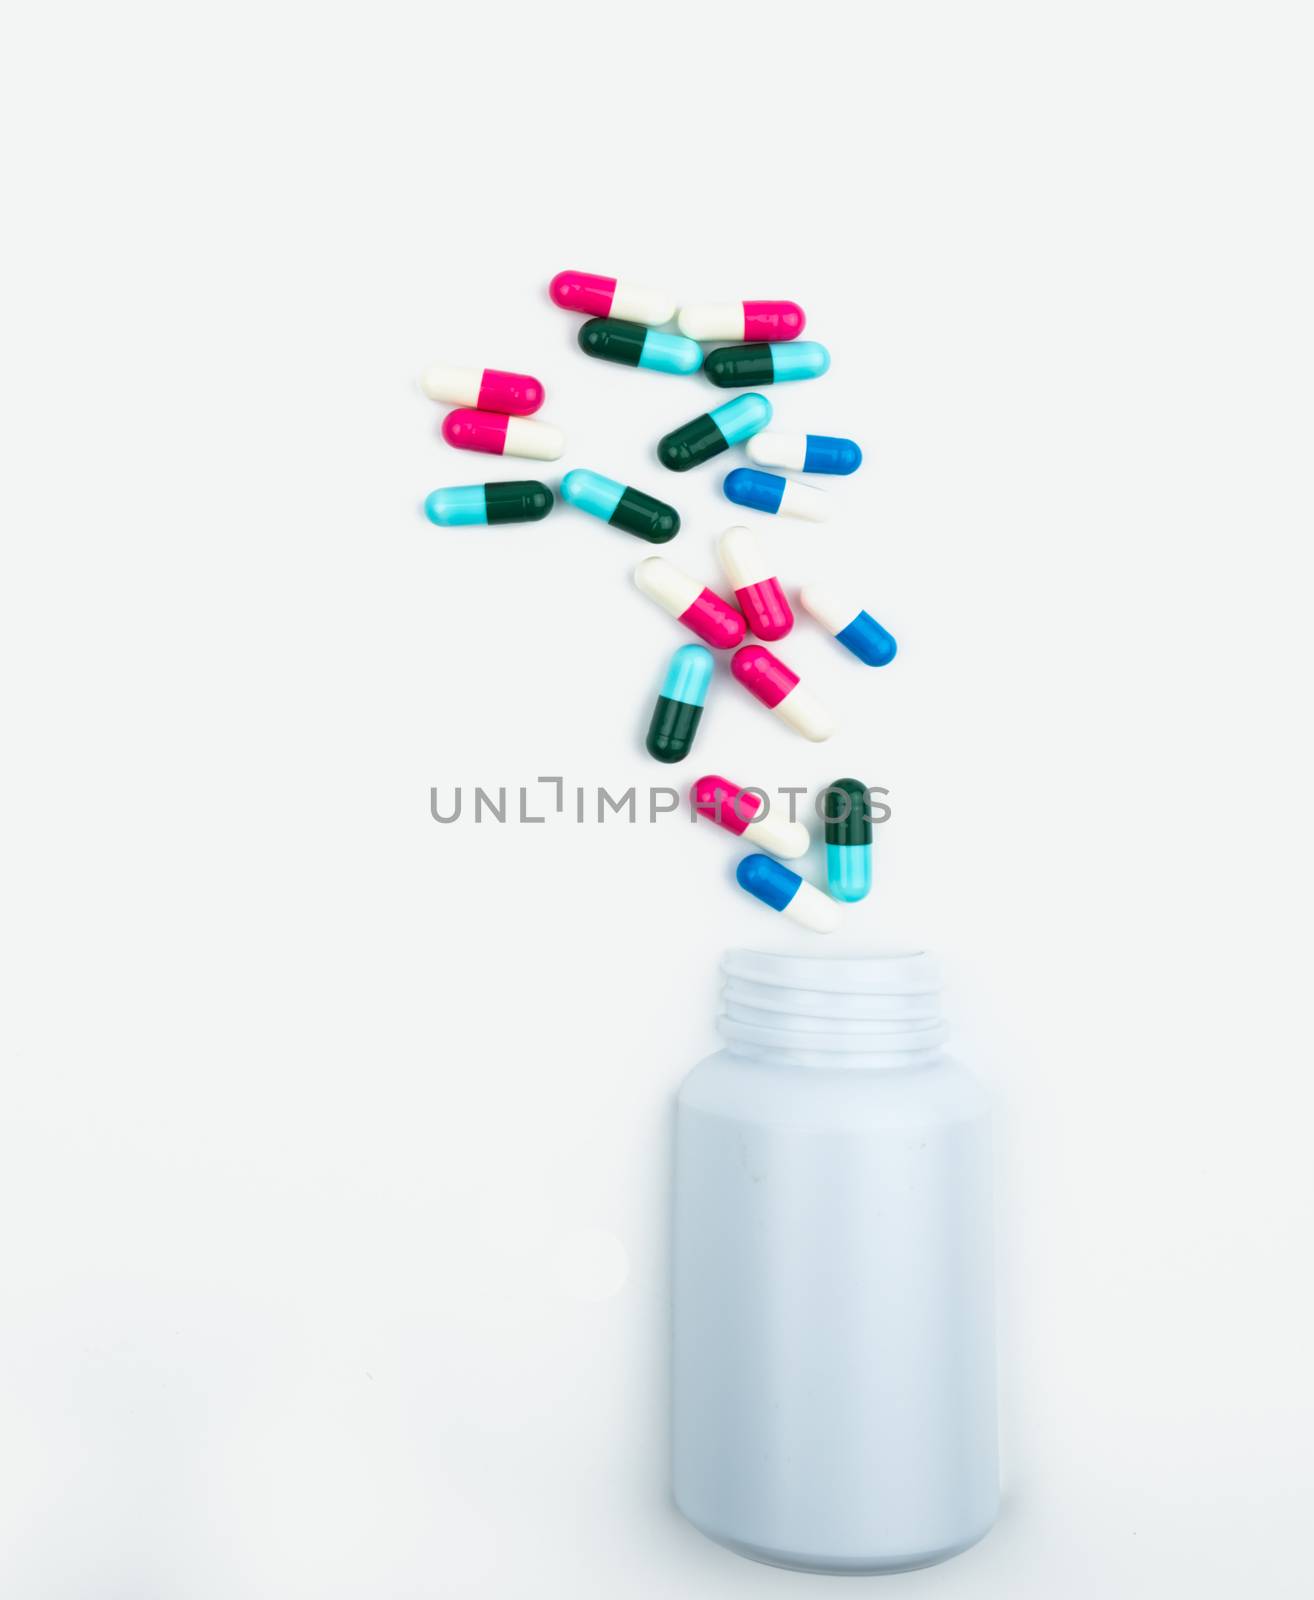 Pouring antibiotics capsule pills into plastic bottle isolated on white background with copy space. Drug storage, antibiotic drug use with reasonable, health policy and health insurance concept. Toxicology. Pharmaceutical industry. Pharmacy background. by Fahroni